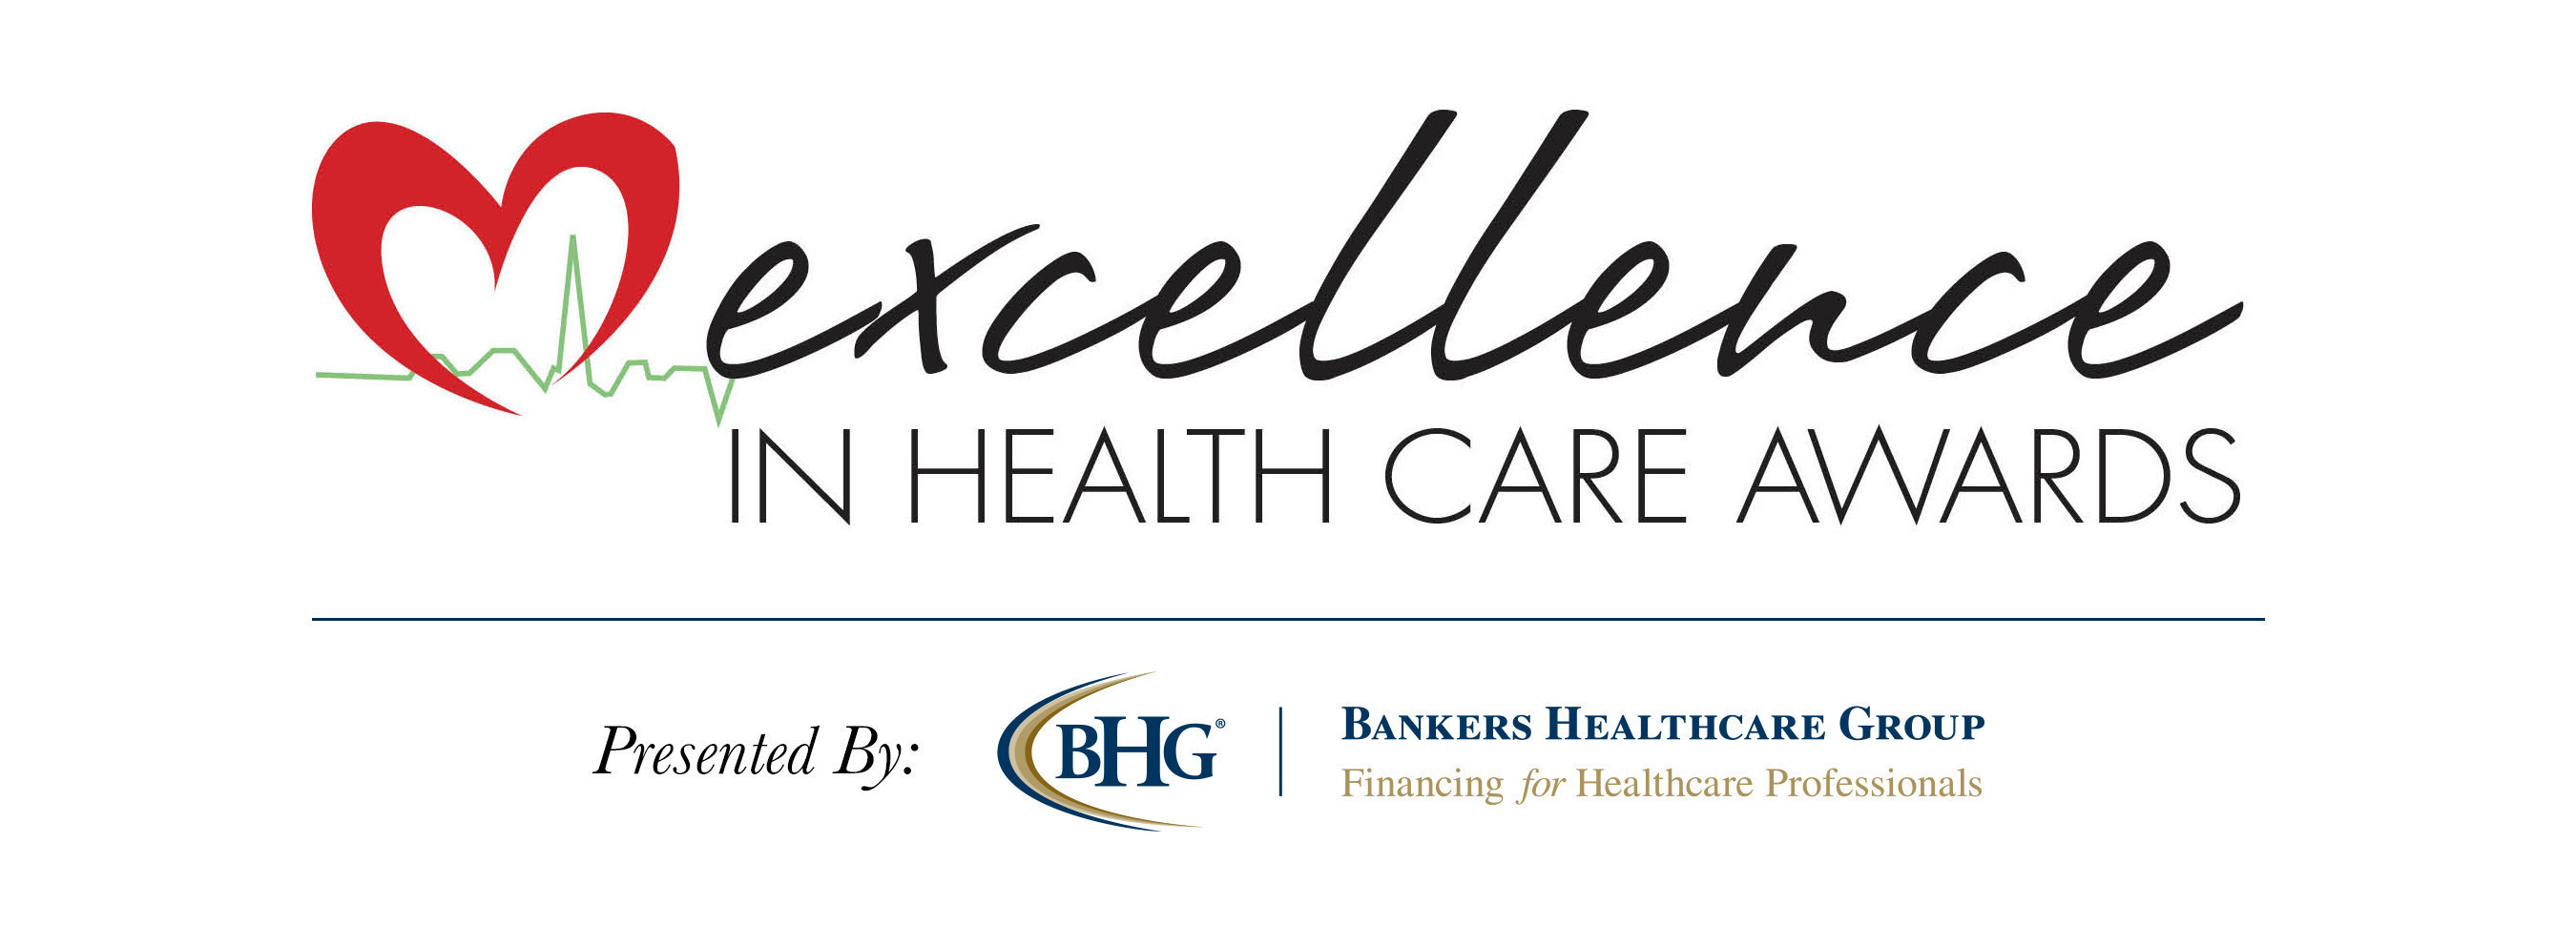 Bankers Healthcare Group presents the 2015 Excellence in Health Care Awards.